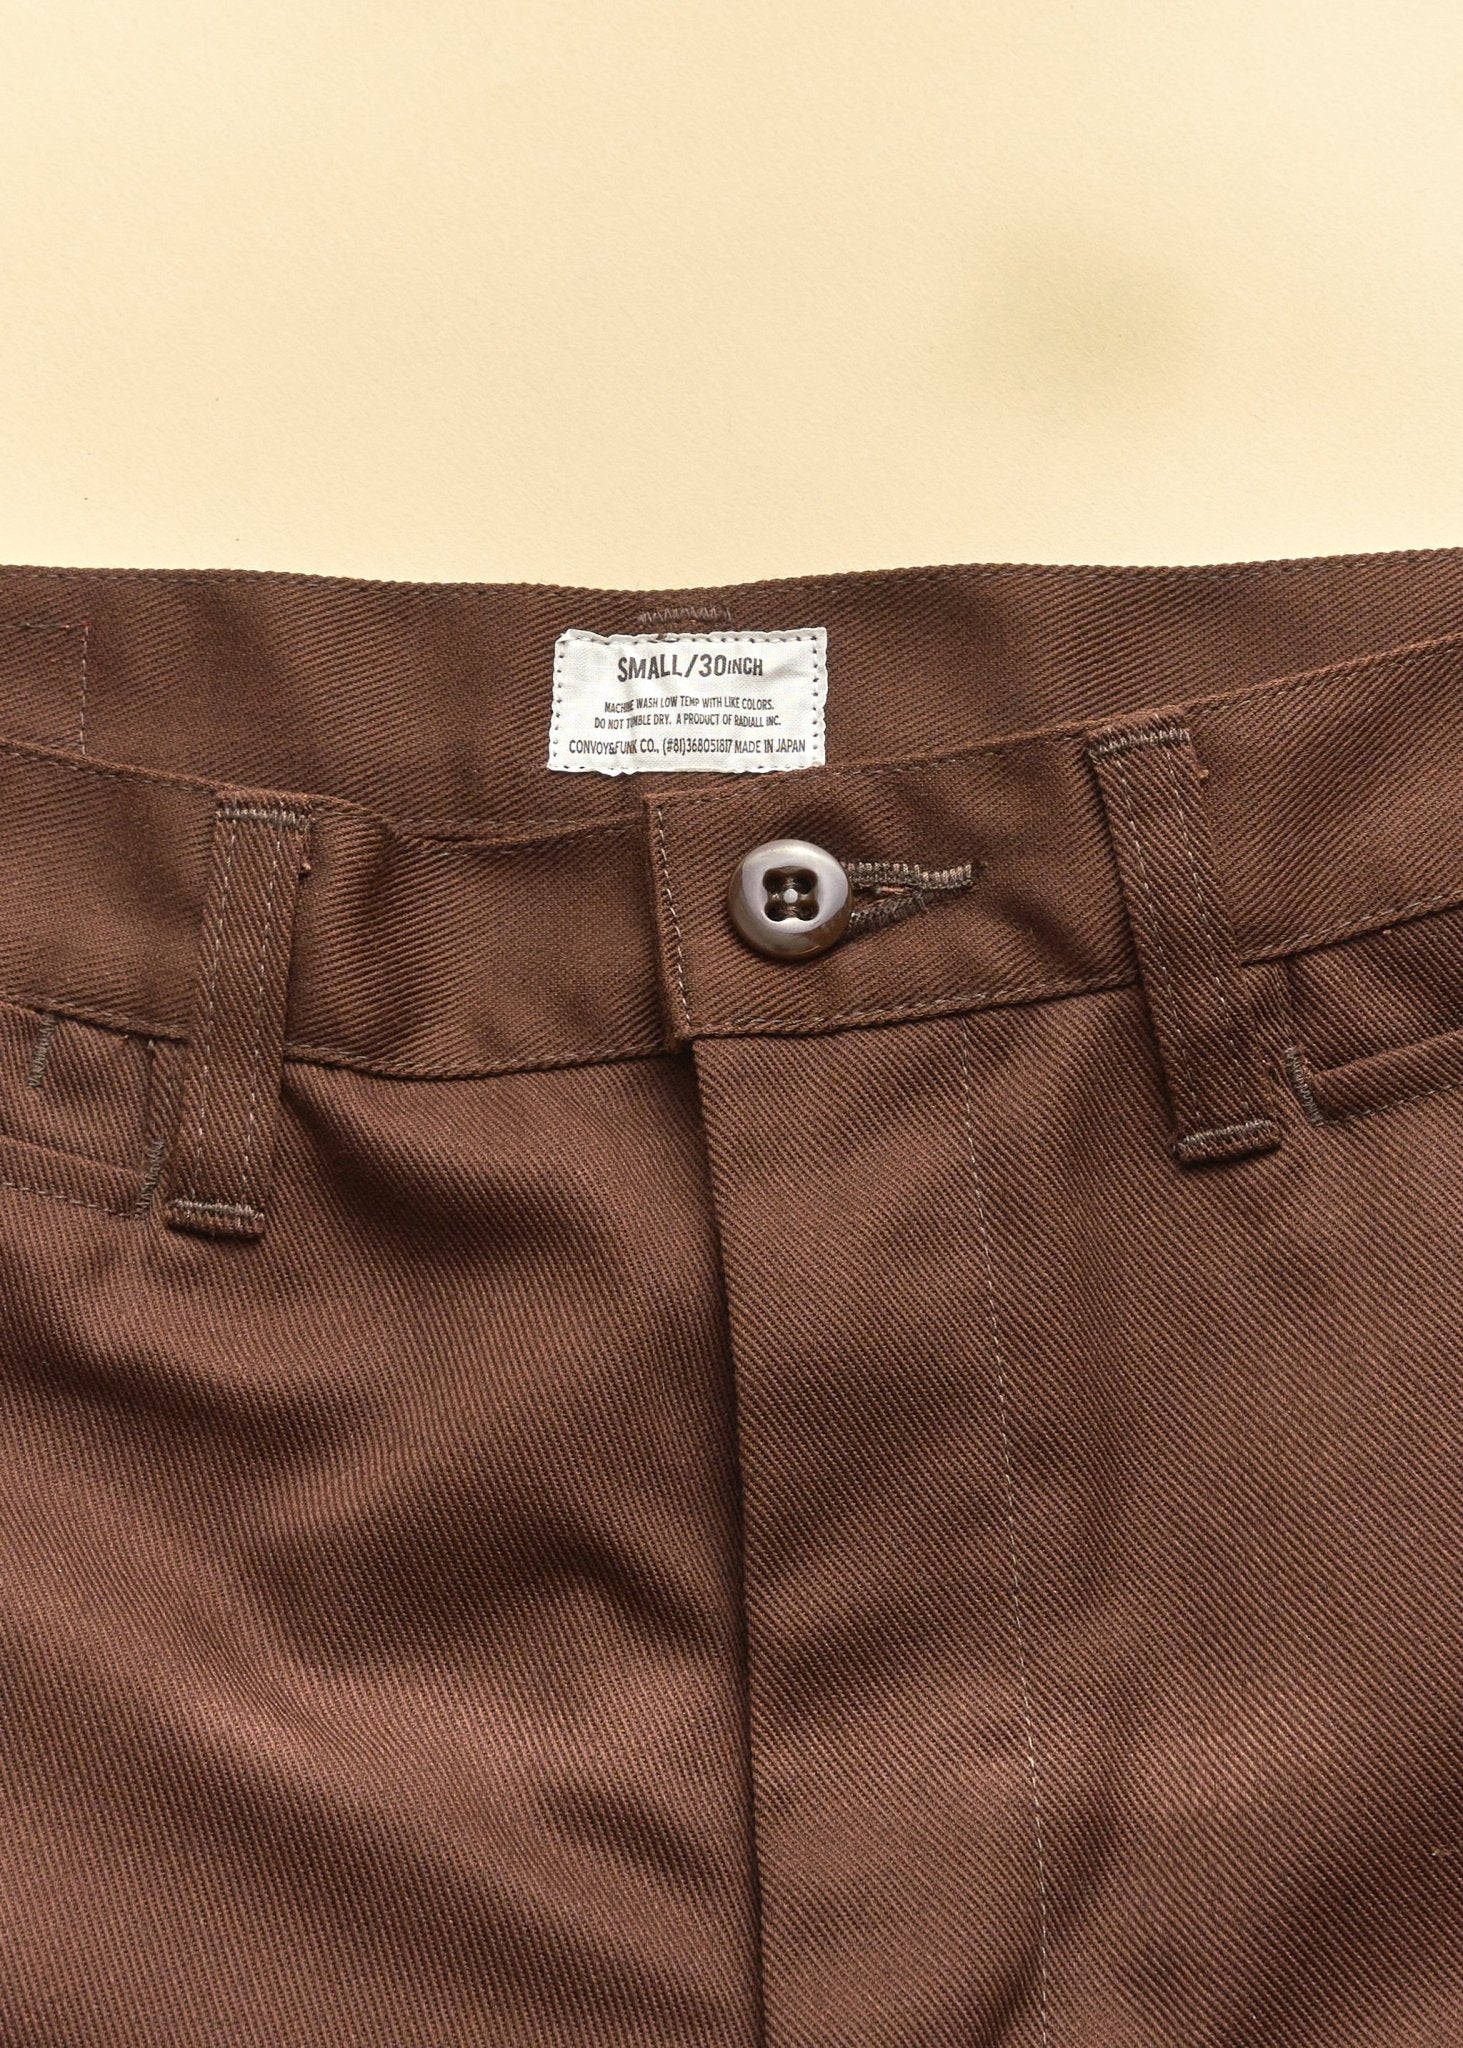 Radiall Frisco Straight Tapered Fit Pants - Brown -Radiall - URAHARA